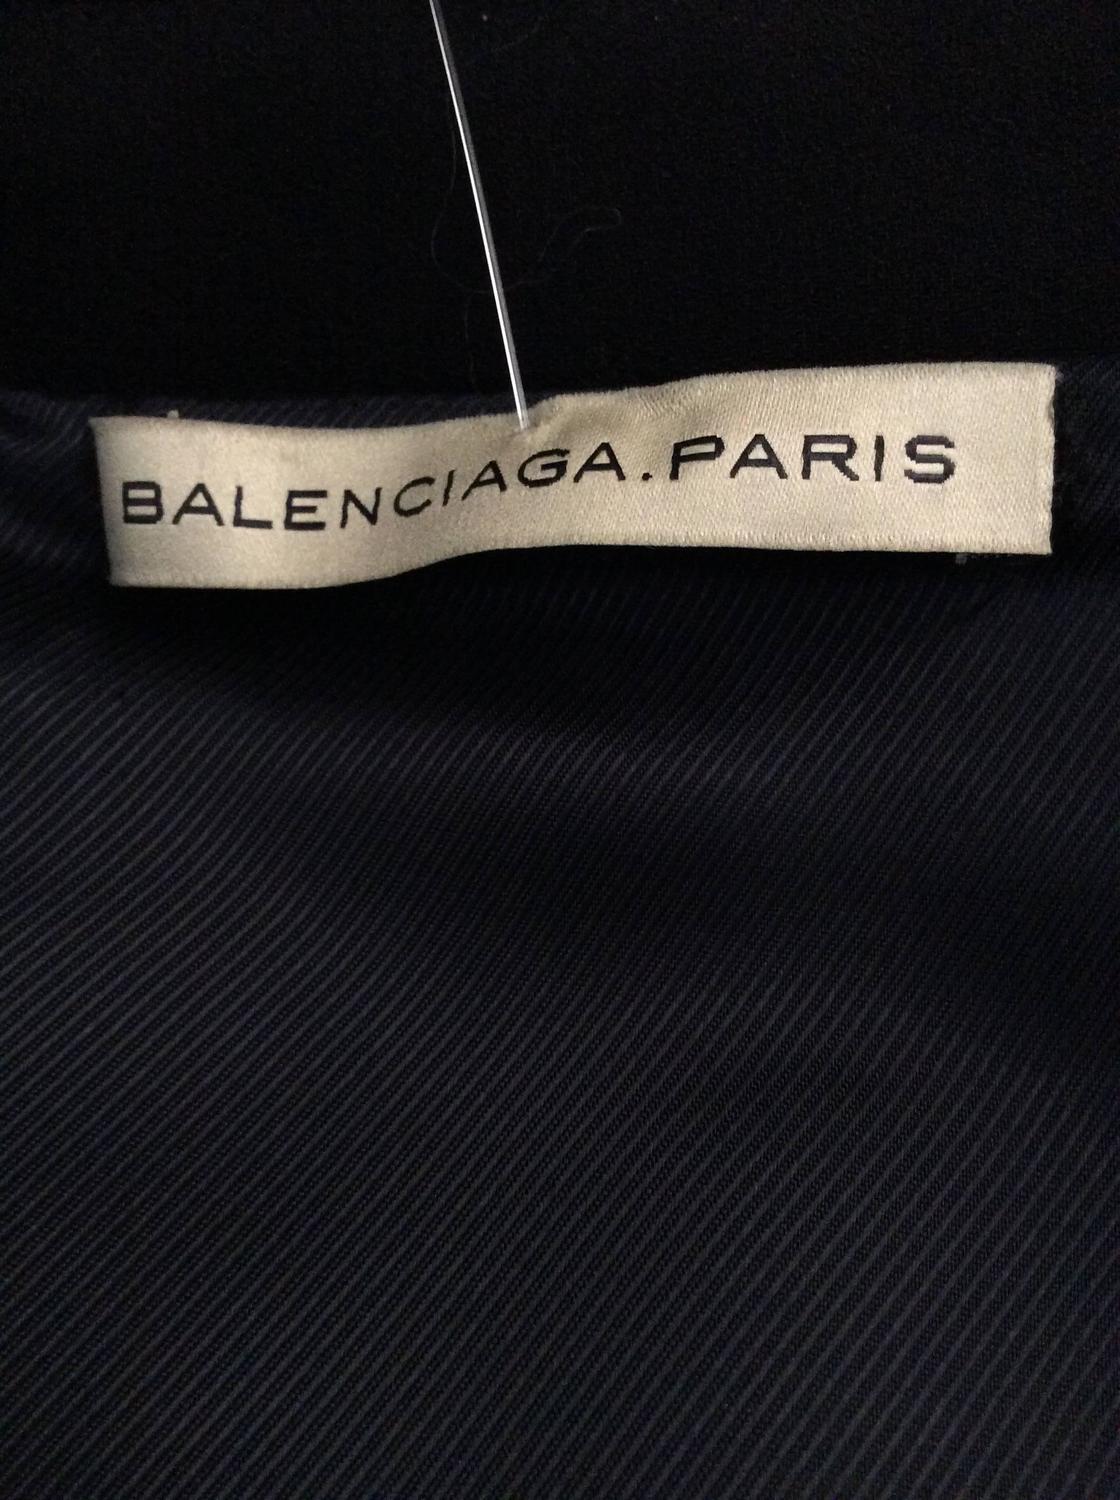 Balenciaga Paris Buttoned Jacket with Silver Embellished Belt For Sale ...